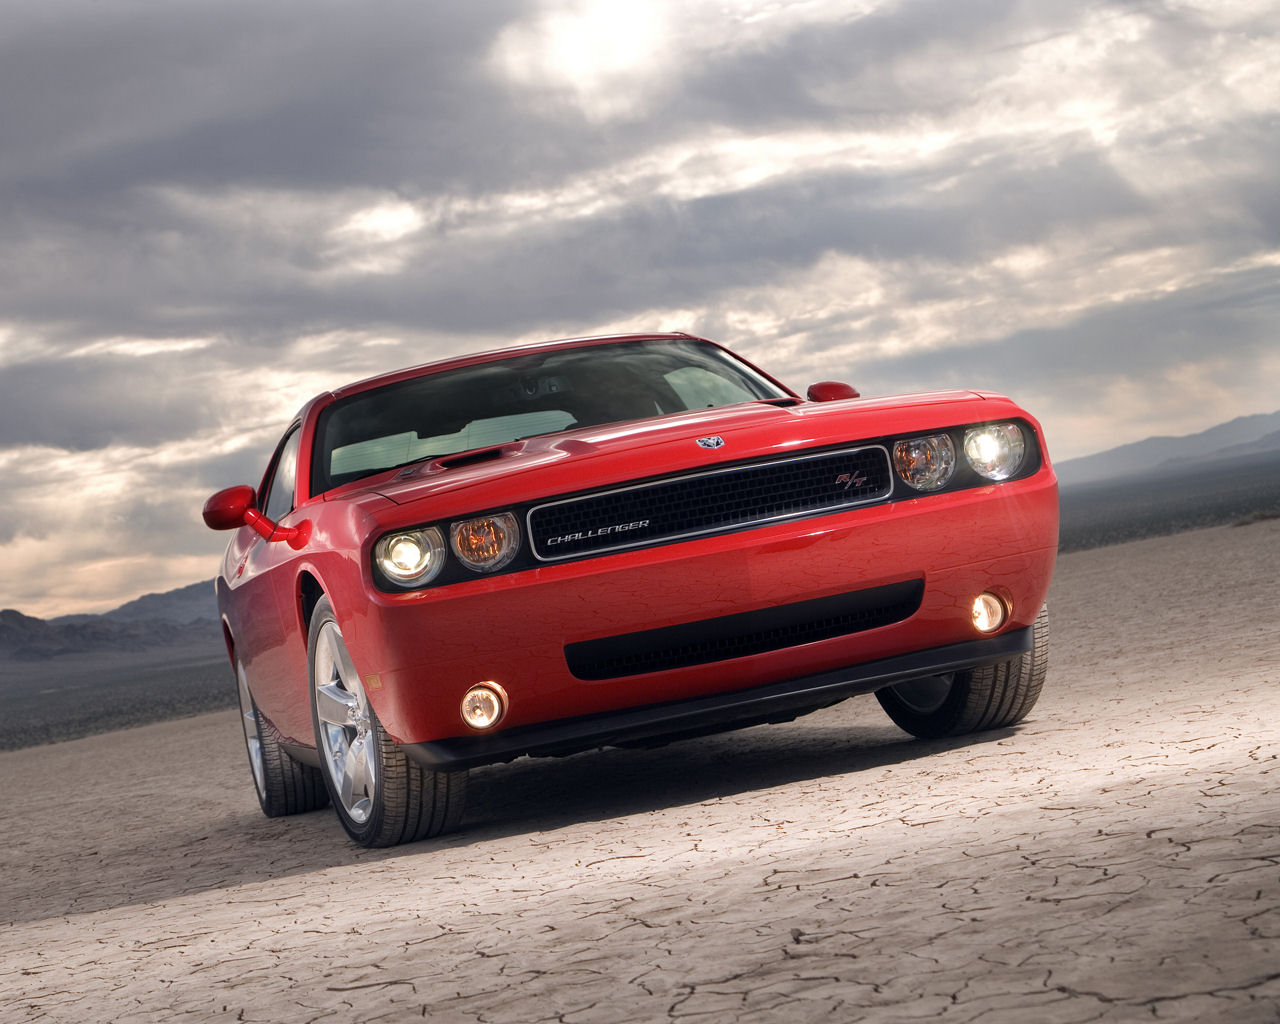 Please Right Click On The Dodge Challenger Wallpaper Below And Choose